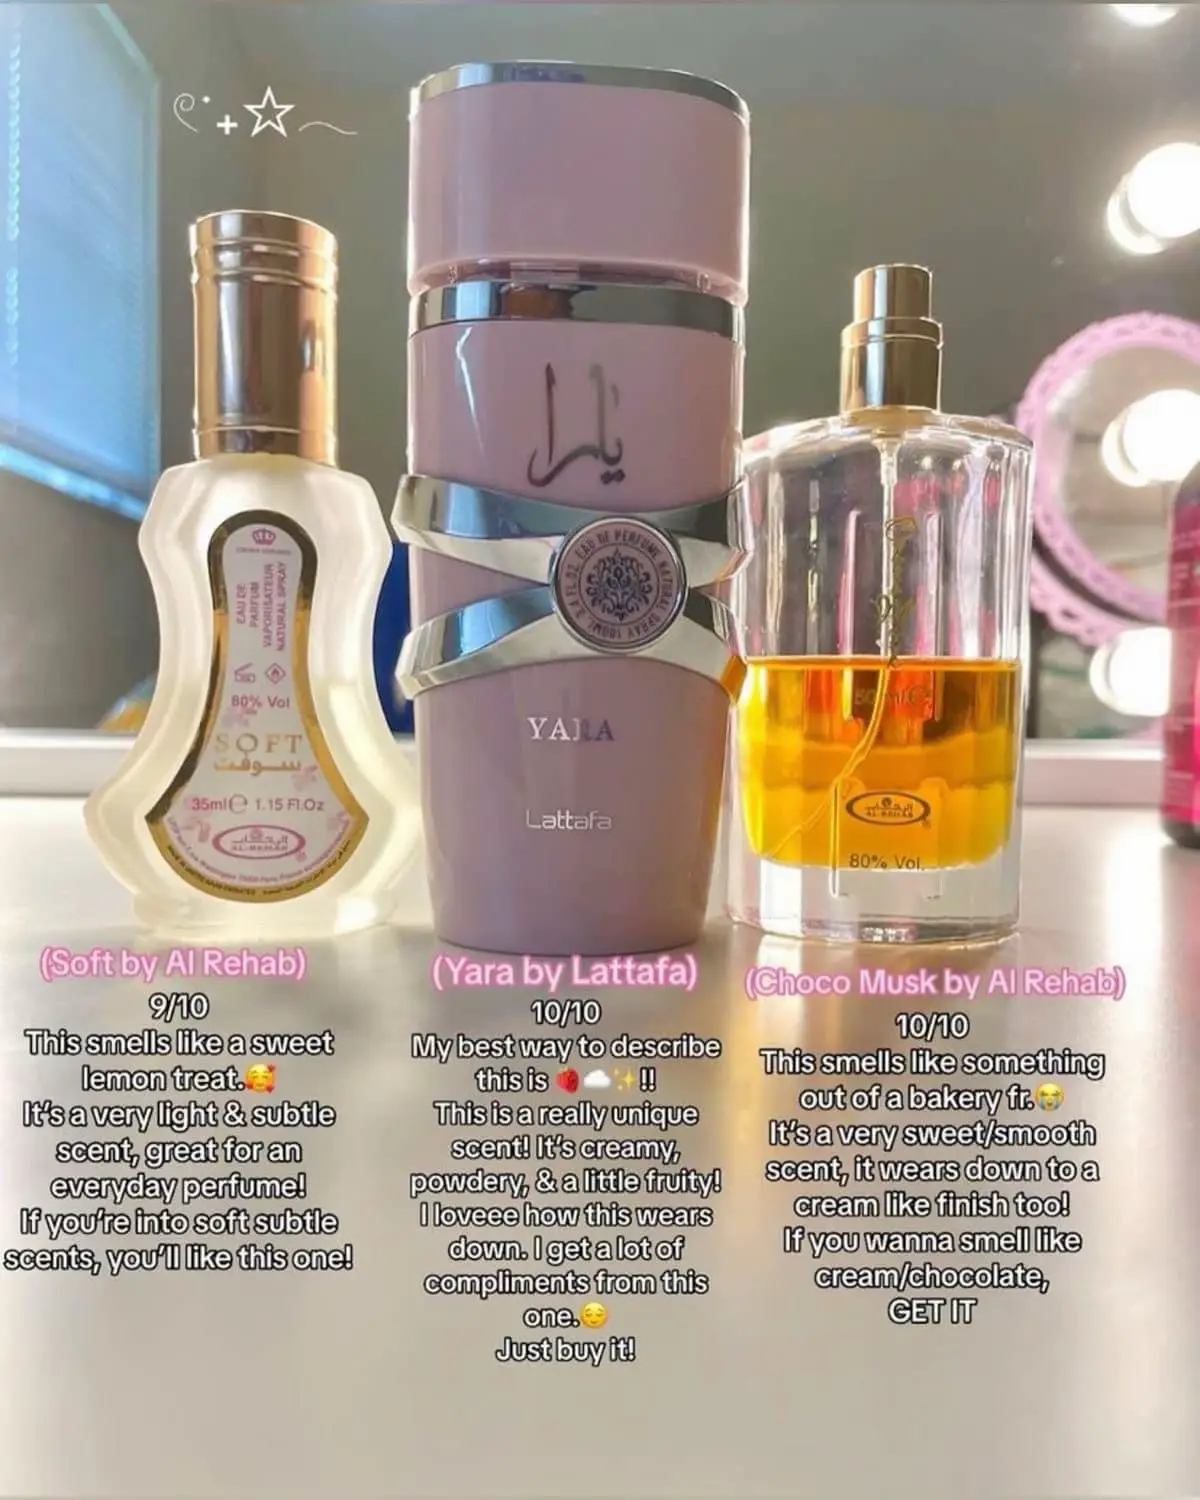 Victoria's Secret - More berries and chocolate? Don't mind if we do.  Indulge a little extra in our enticing, limited-edition fragrance with the  Tease Bundle. For $68, enjoy a 1.7oz Eau de